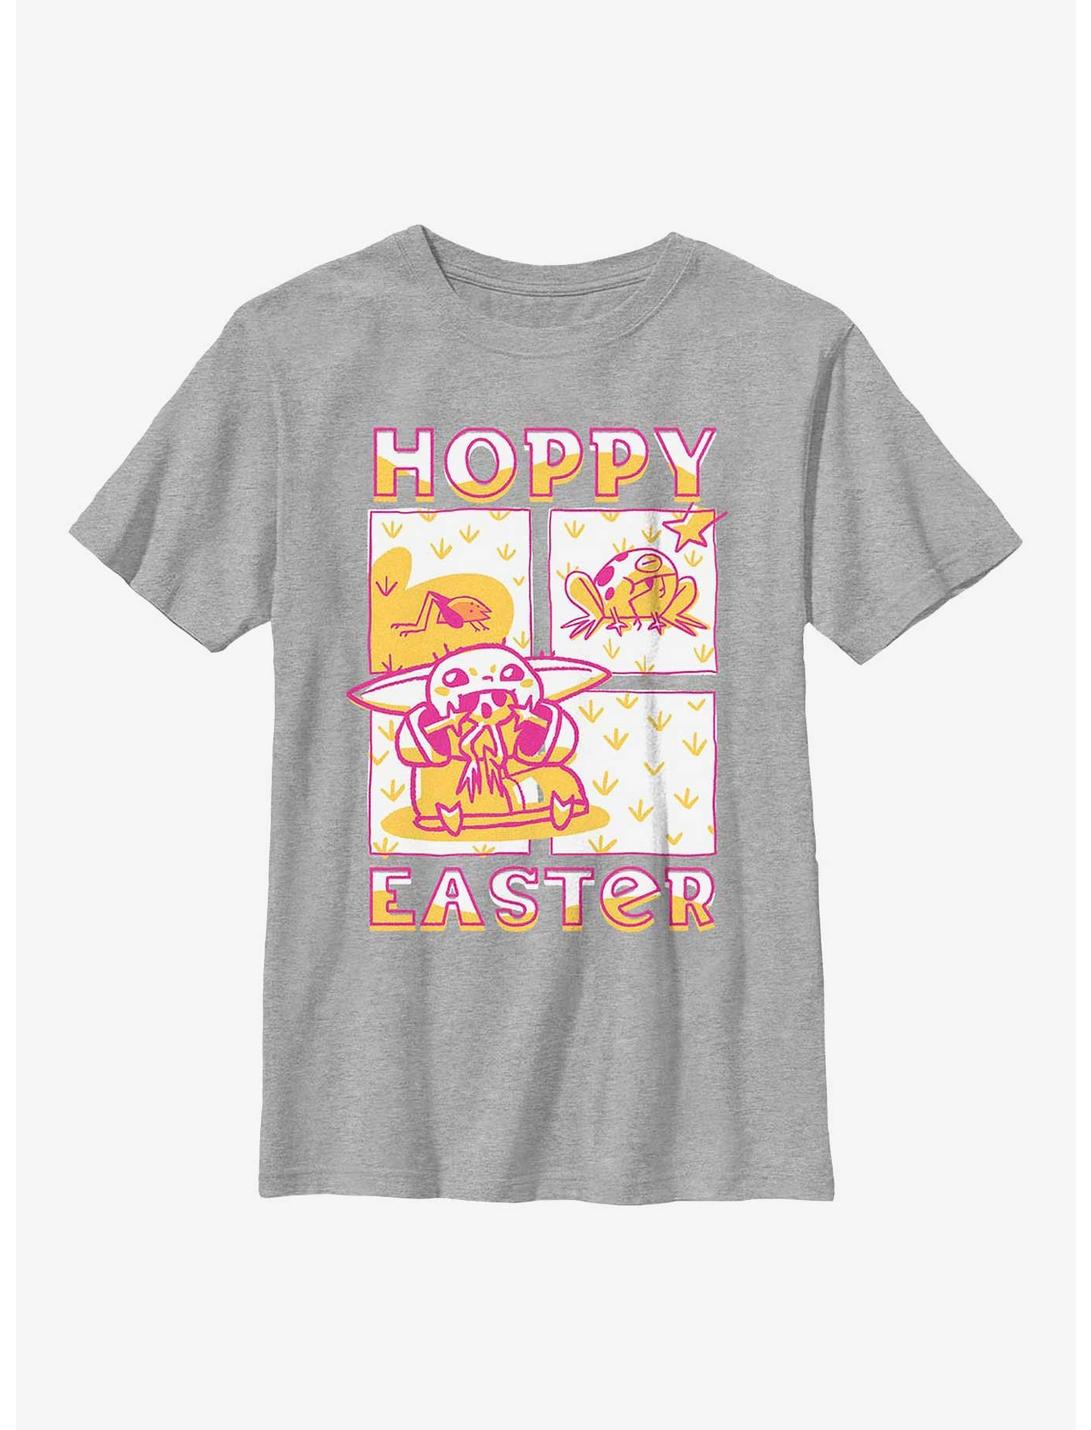 Star Wars The Mandalorian Hoppy Easter The Child Youth T-Shirt, ATH HTR, hi-res